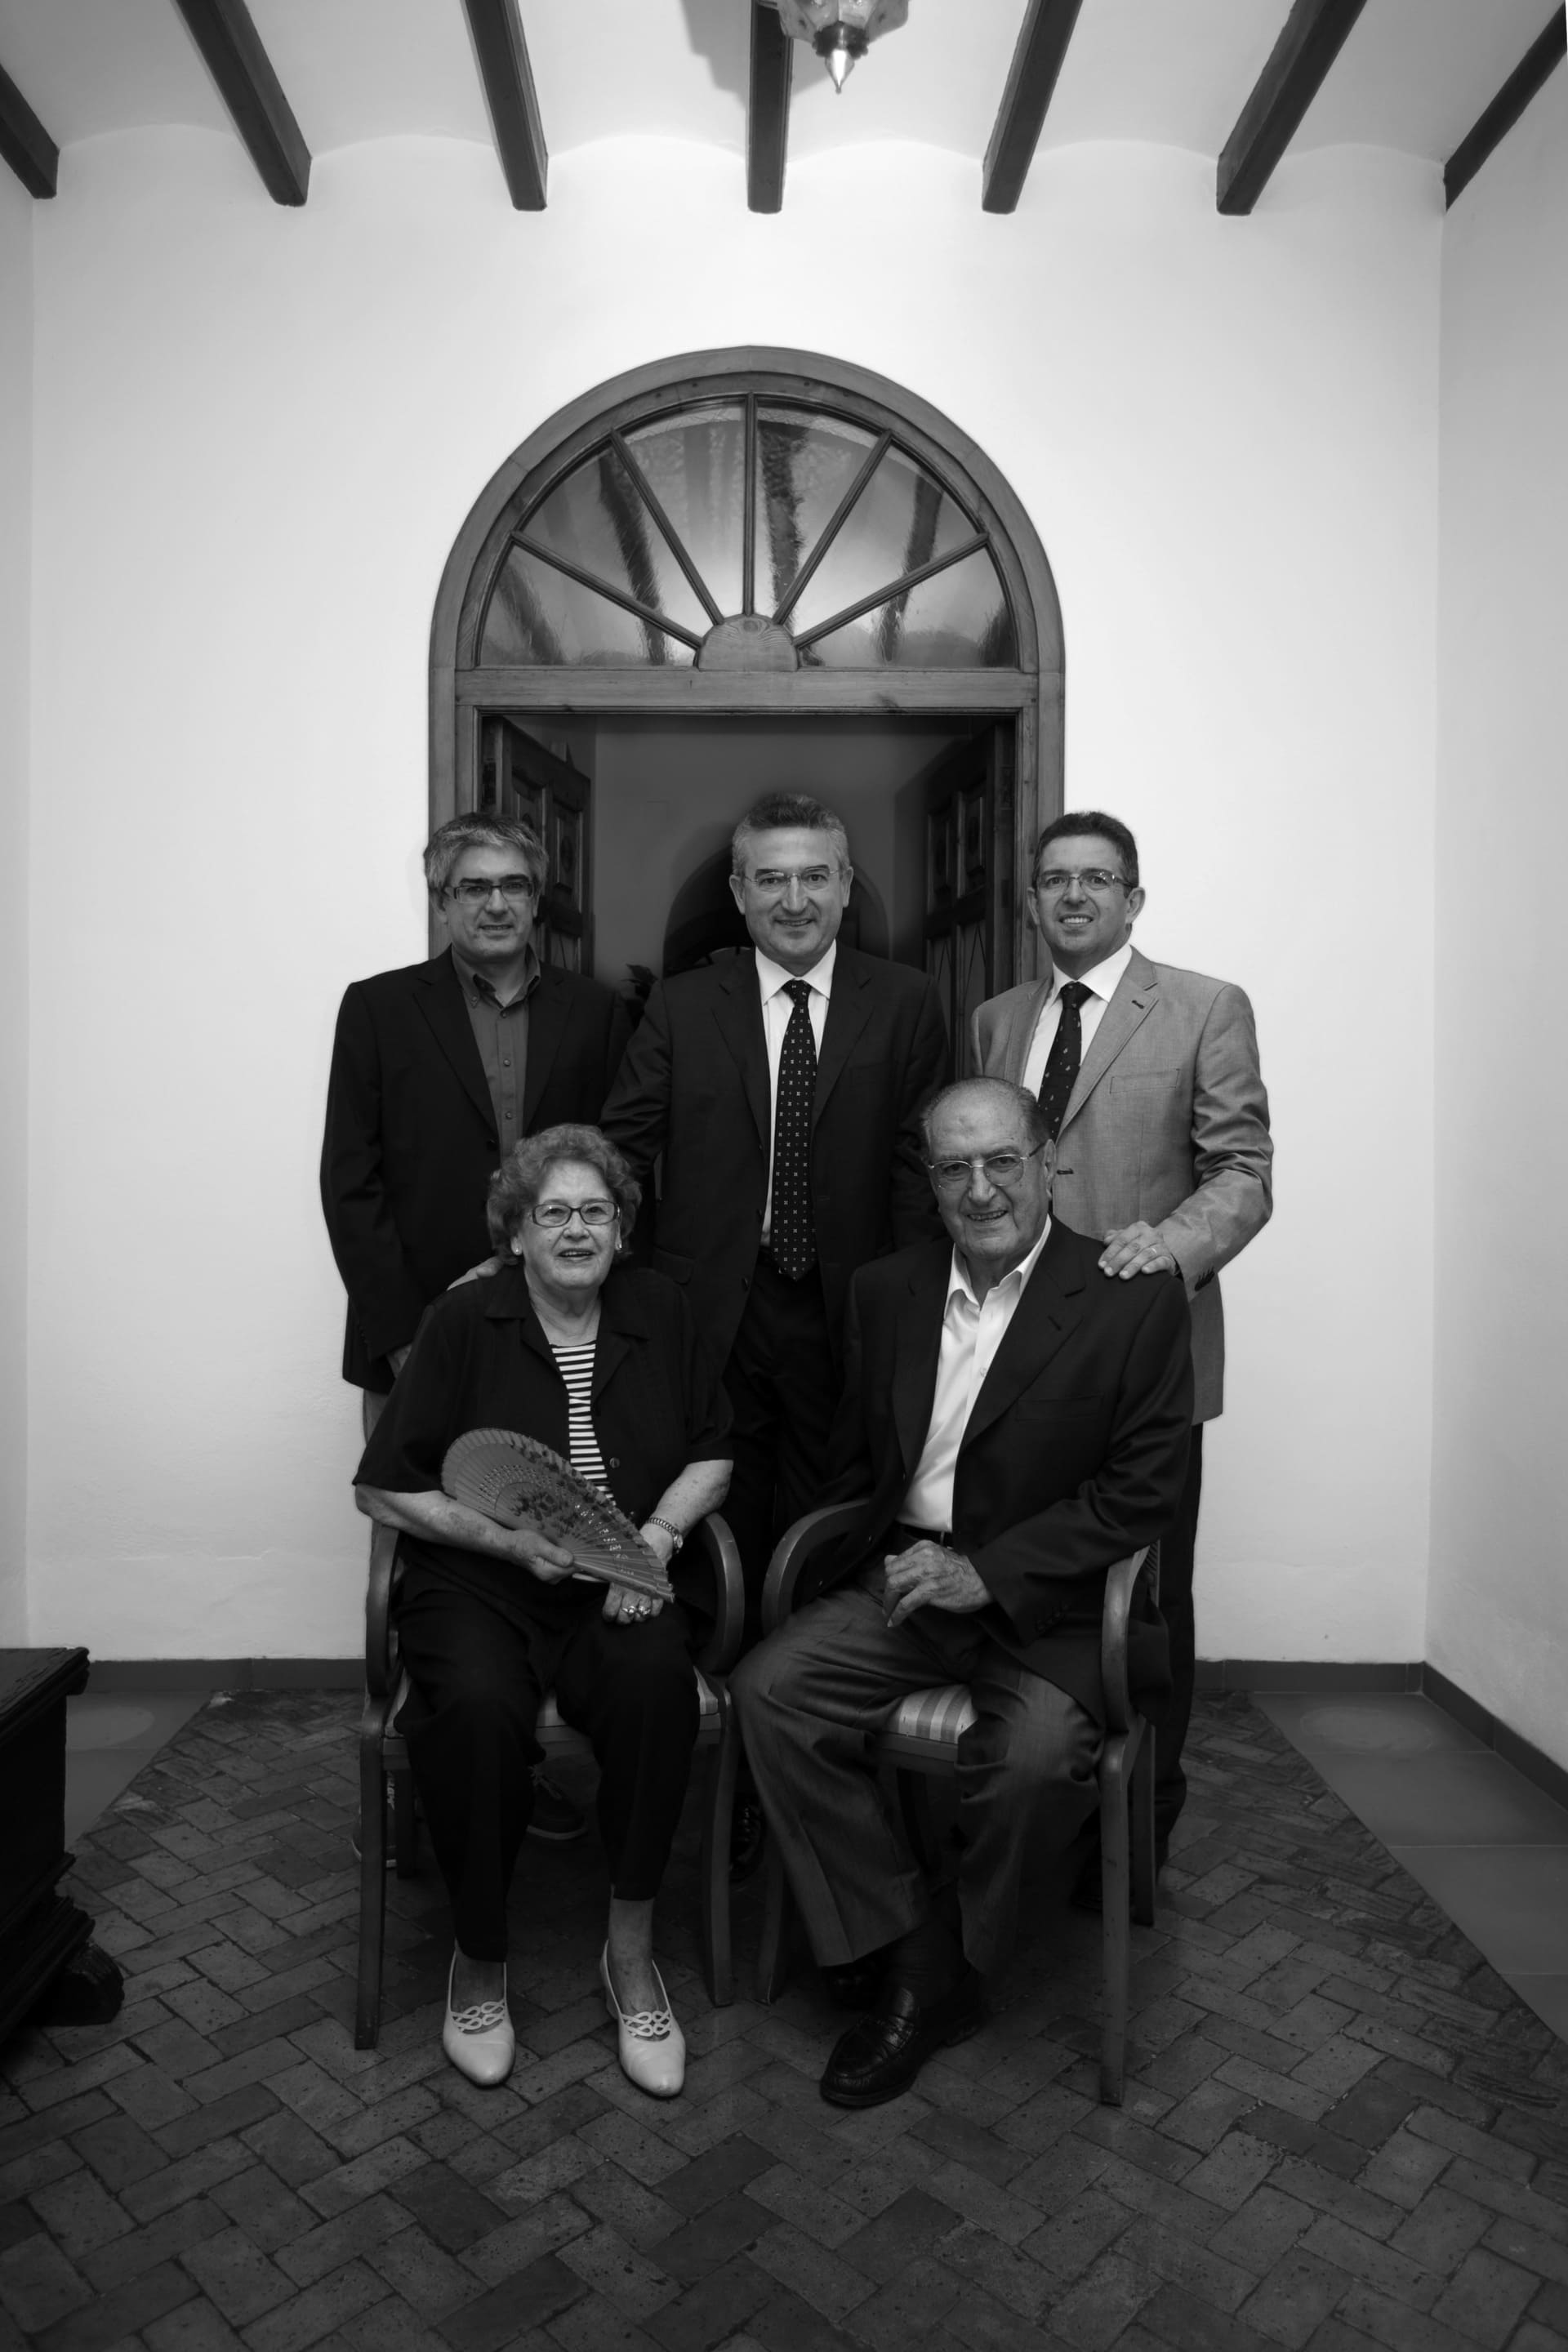 The Ribes Bas family in 2009